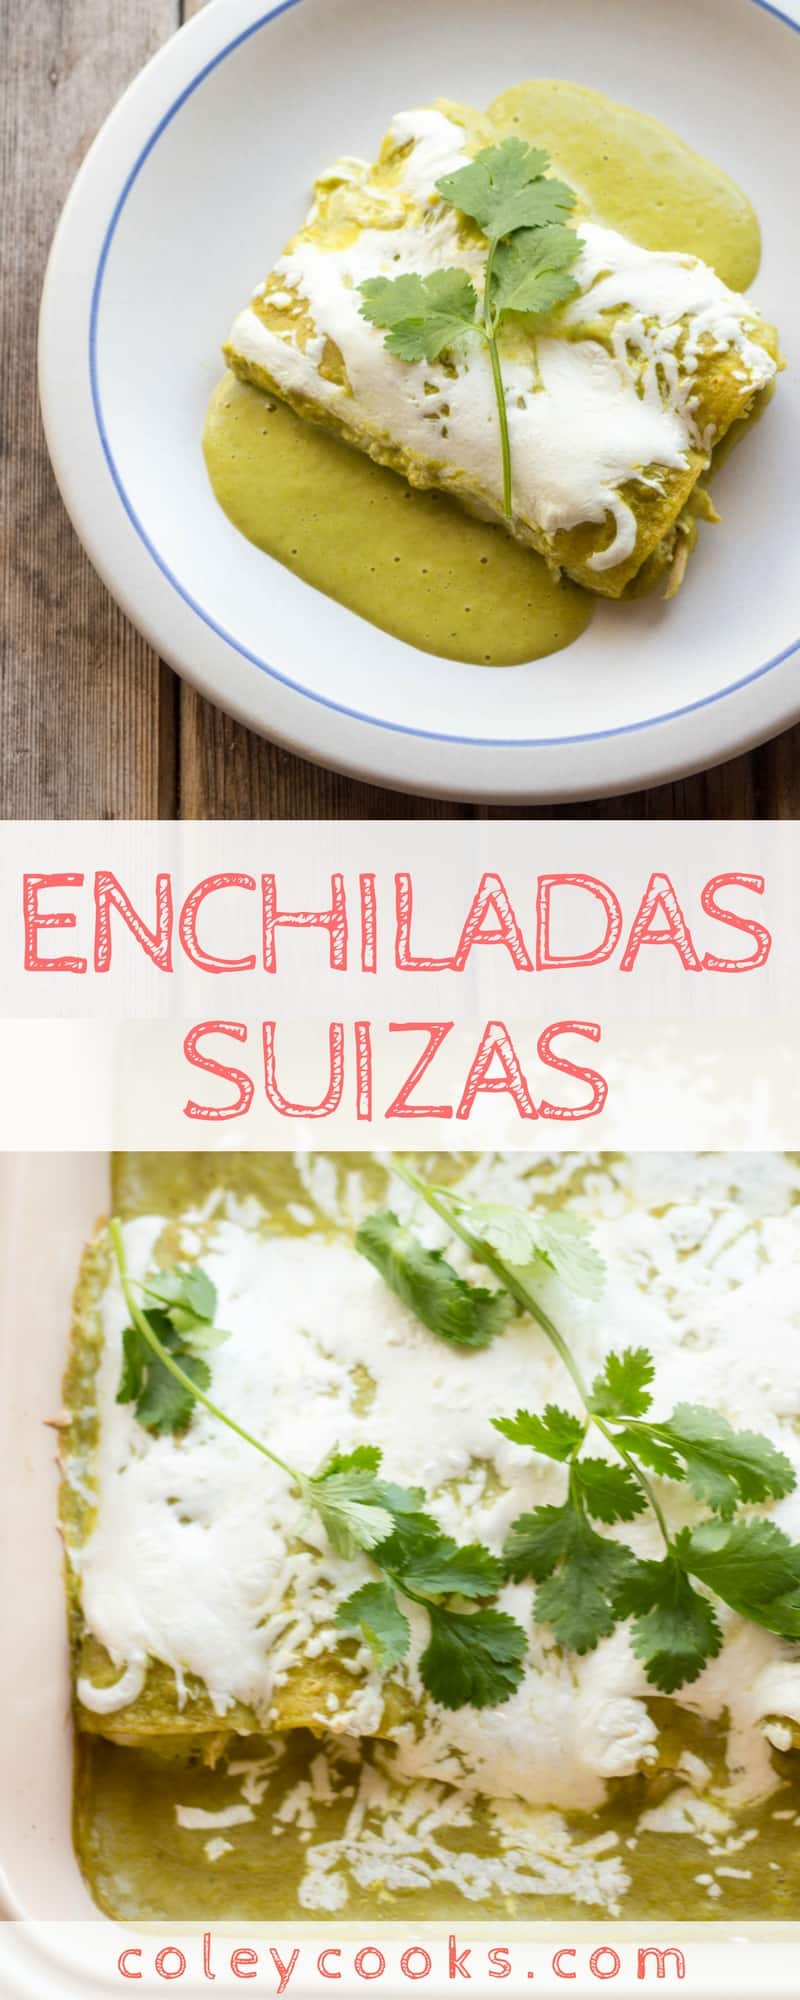 ENCHILADAS SUIZAS | This classic Mexican recipe is made with pulled chicken rolled in corn tortillas and smothered in a creamy tomatillo sauce #cincodemayo #glutenfree | ColeyCooks.com